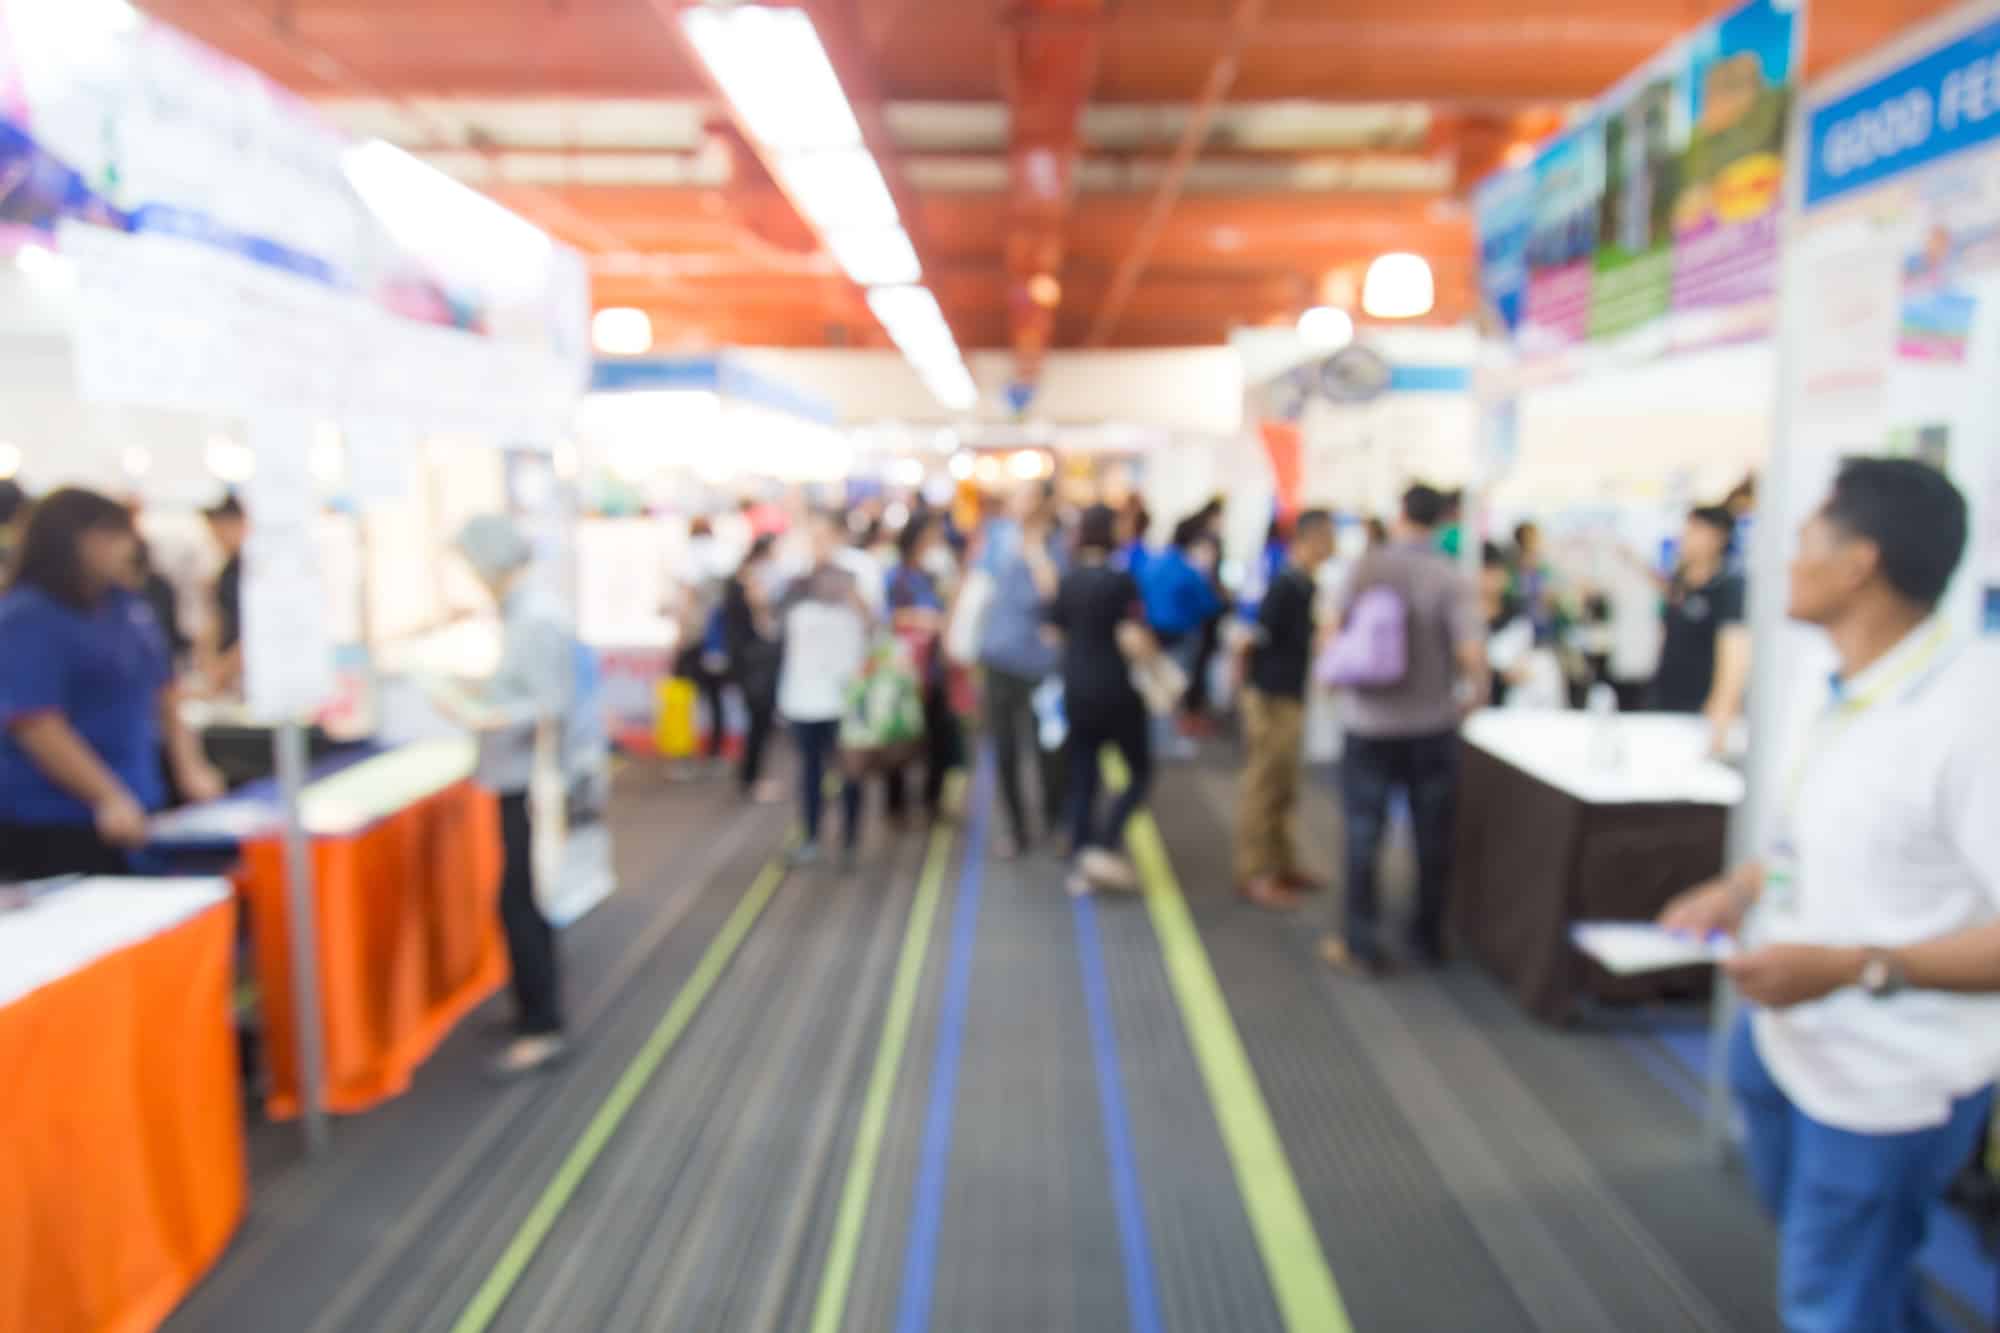 8 Tradeshow Pre-Show Planning Tips